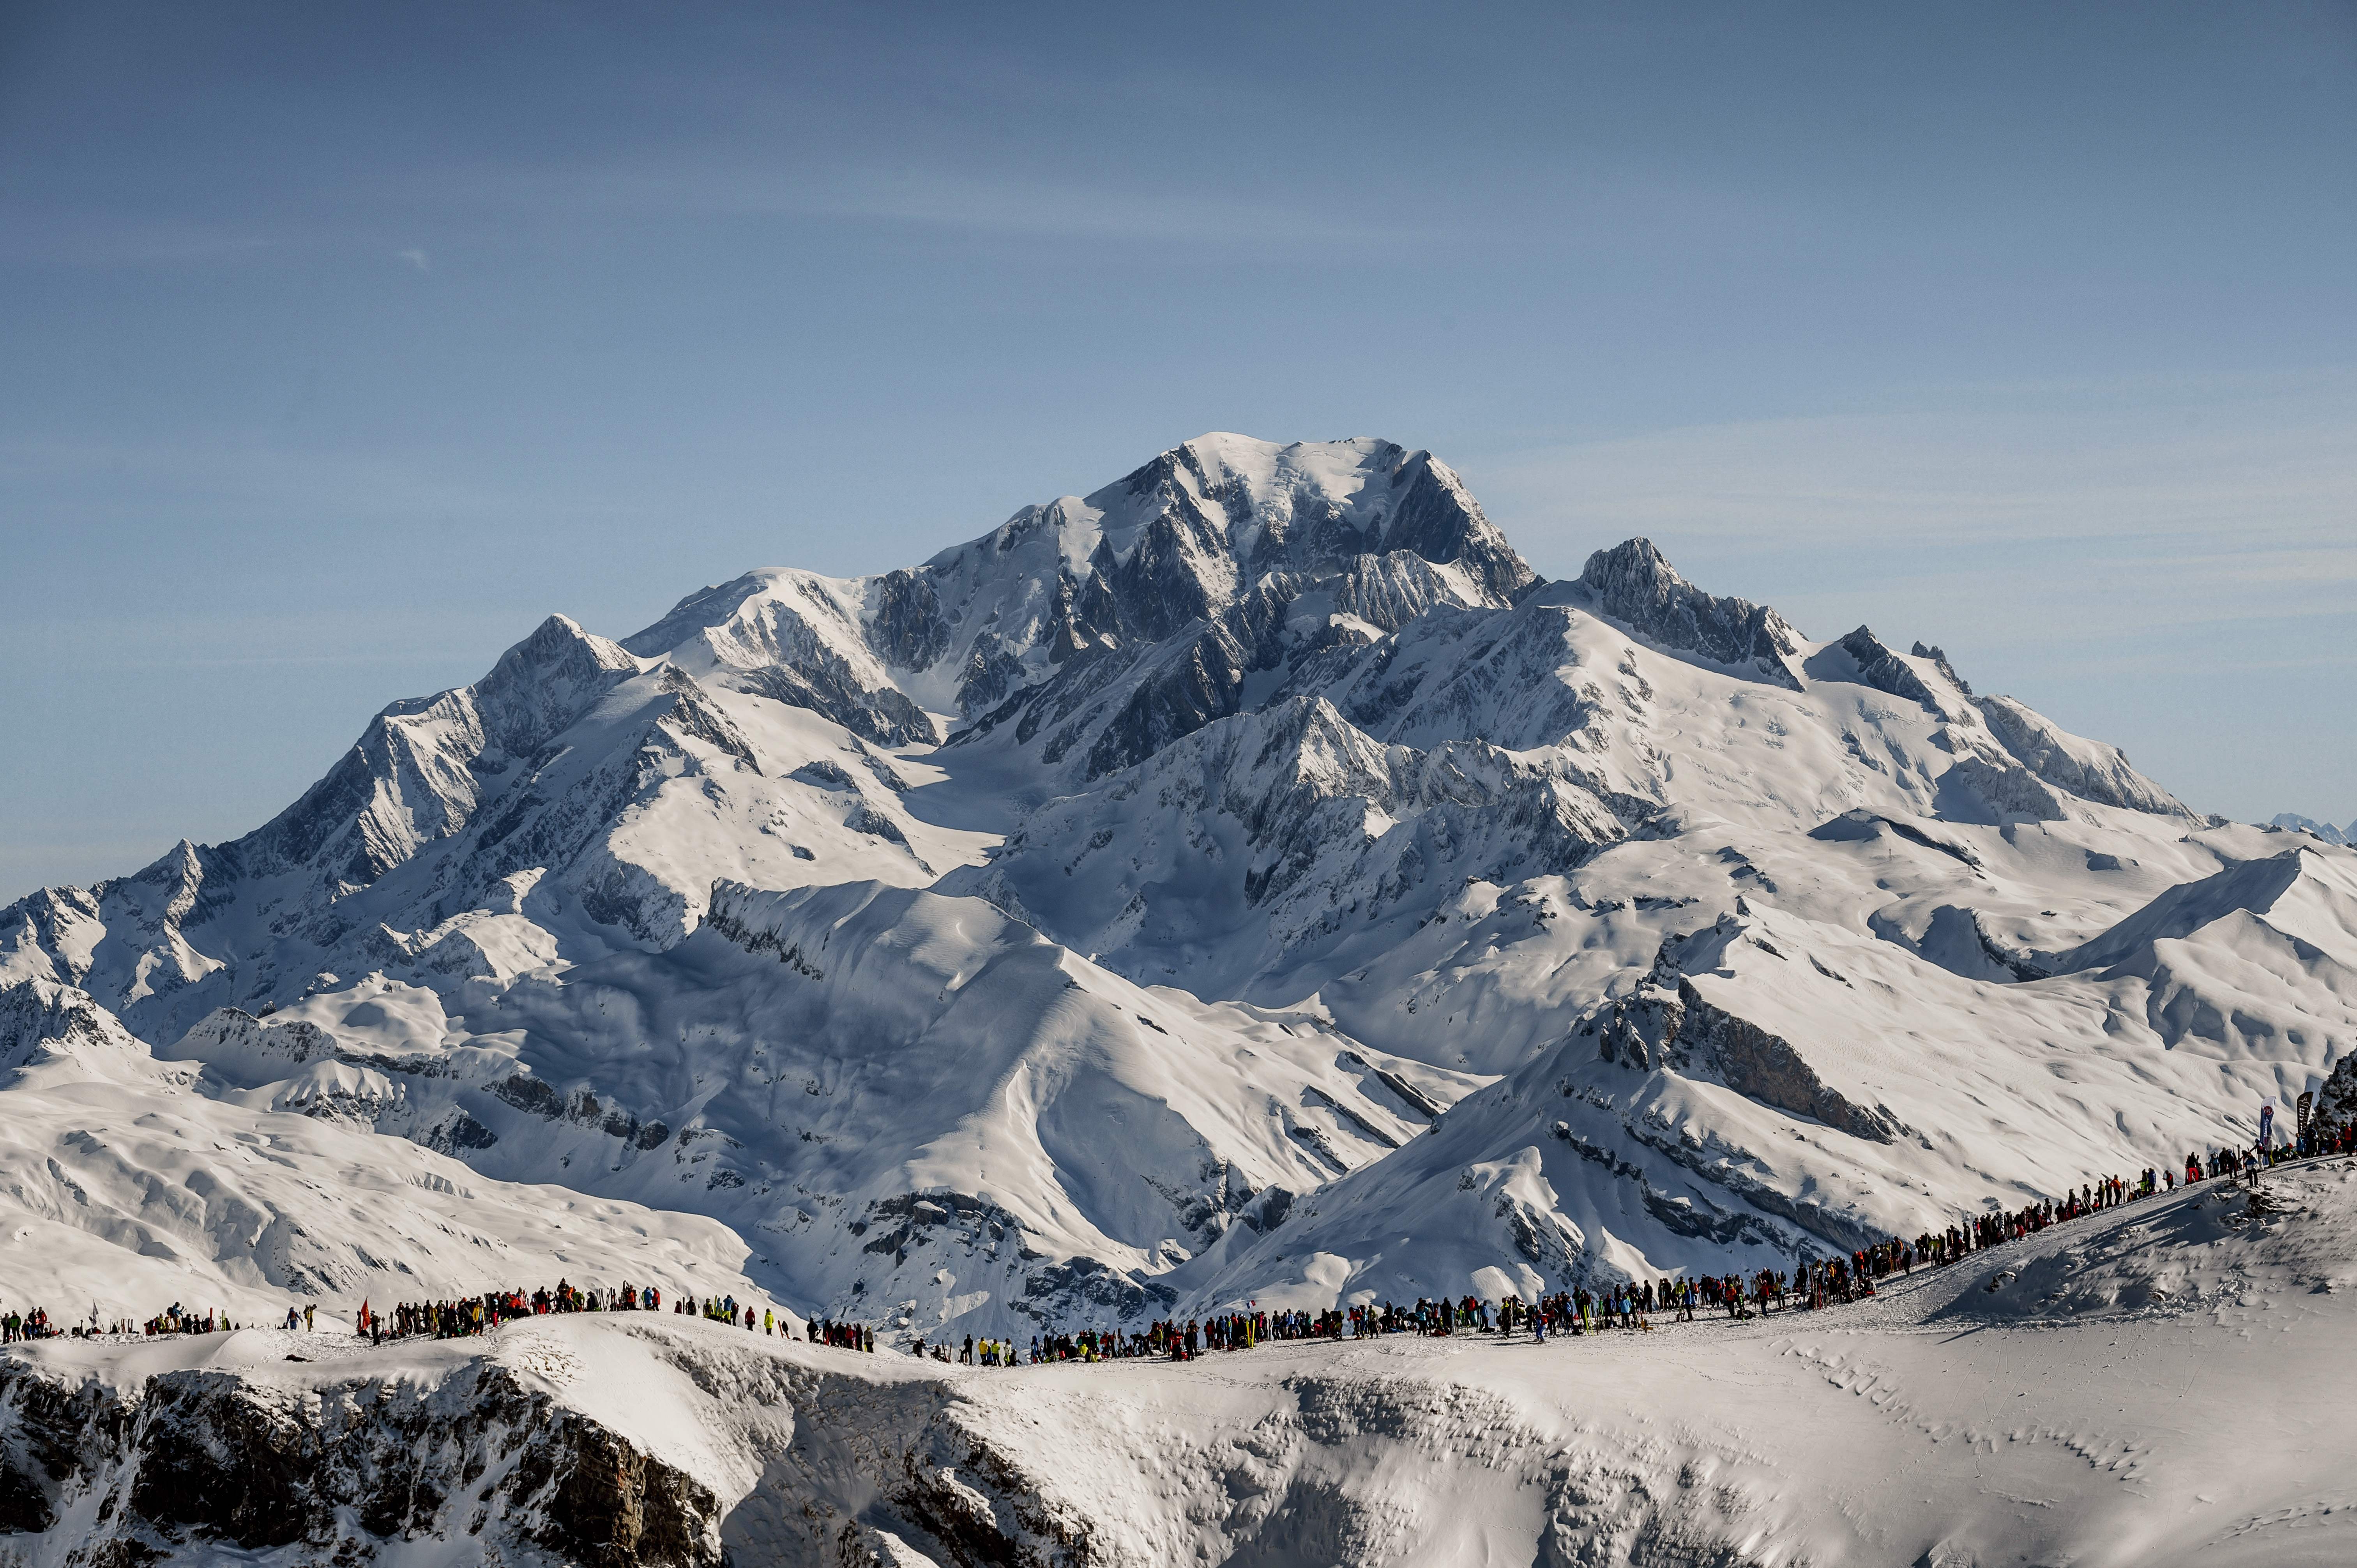 Around 80 people die on the Mont Blanc massif each year